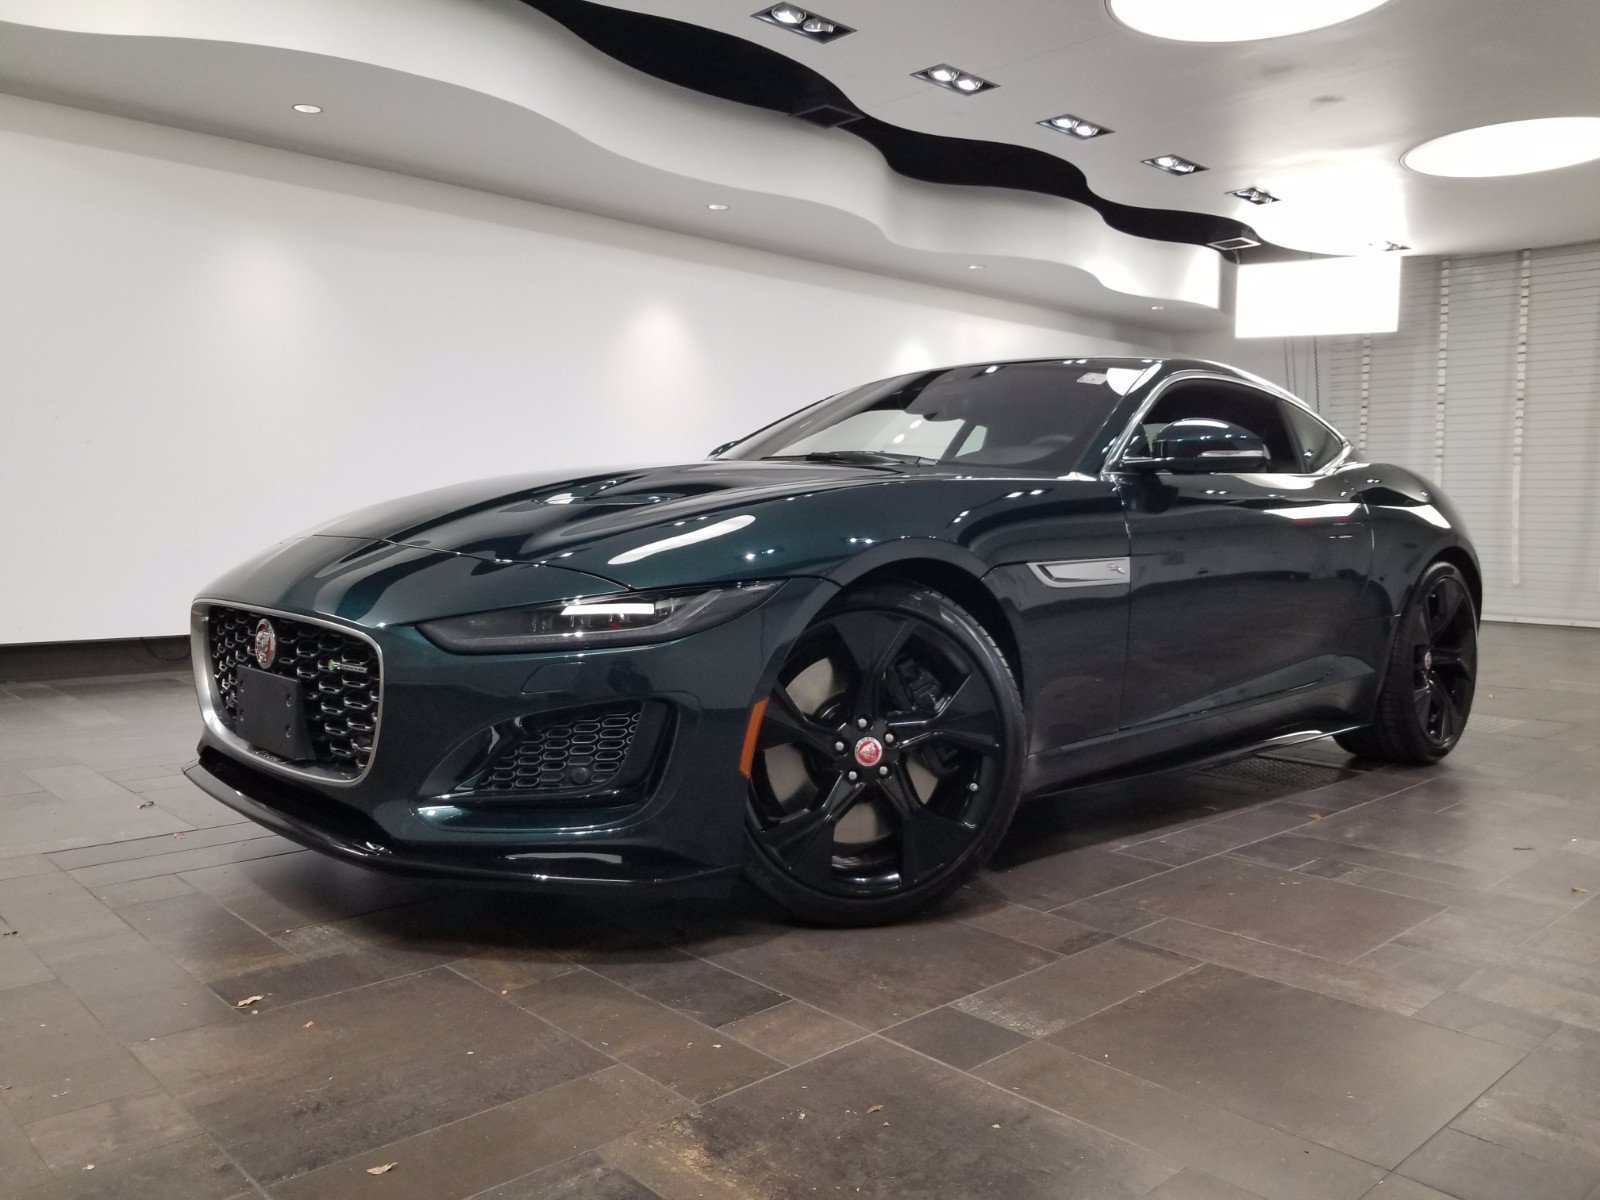 New 2021 Jaguar F-TYPE R-Dynamic Coupe Coupe in West Palm ...